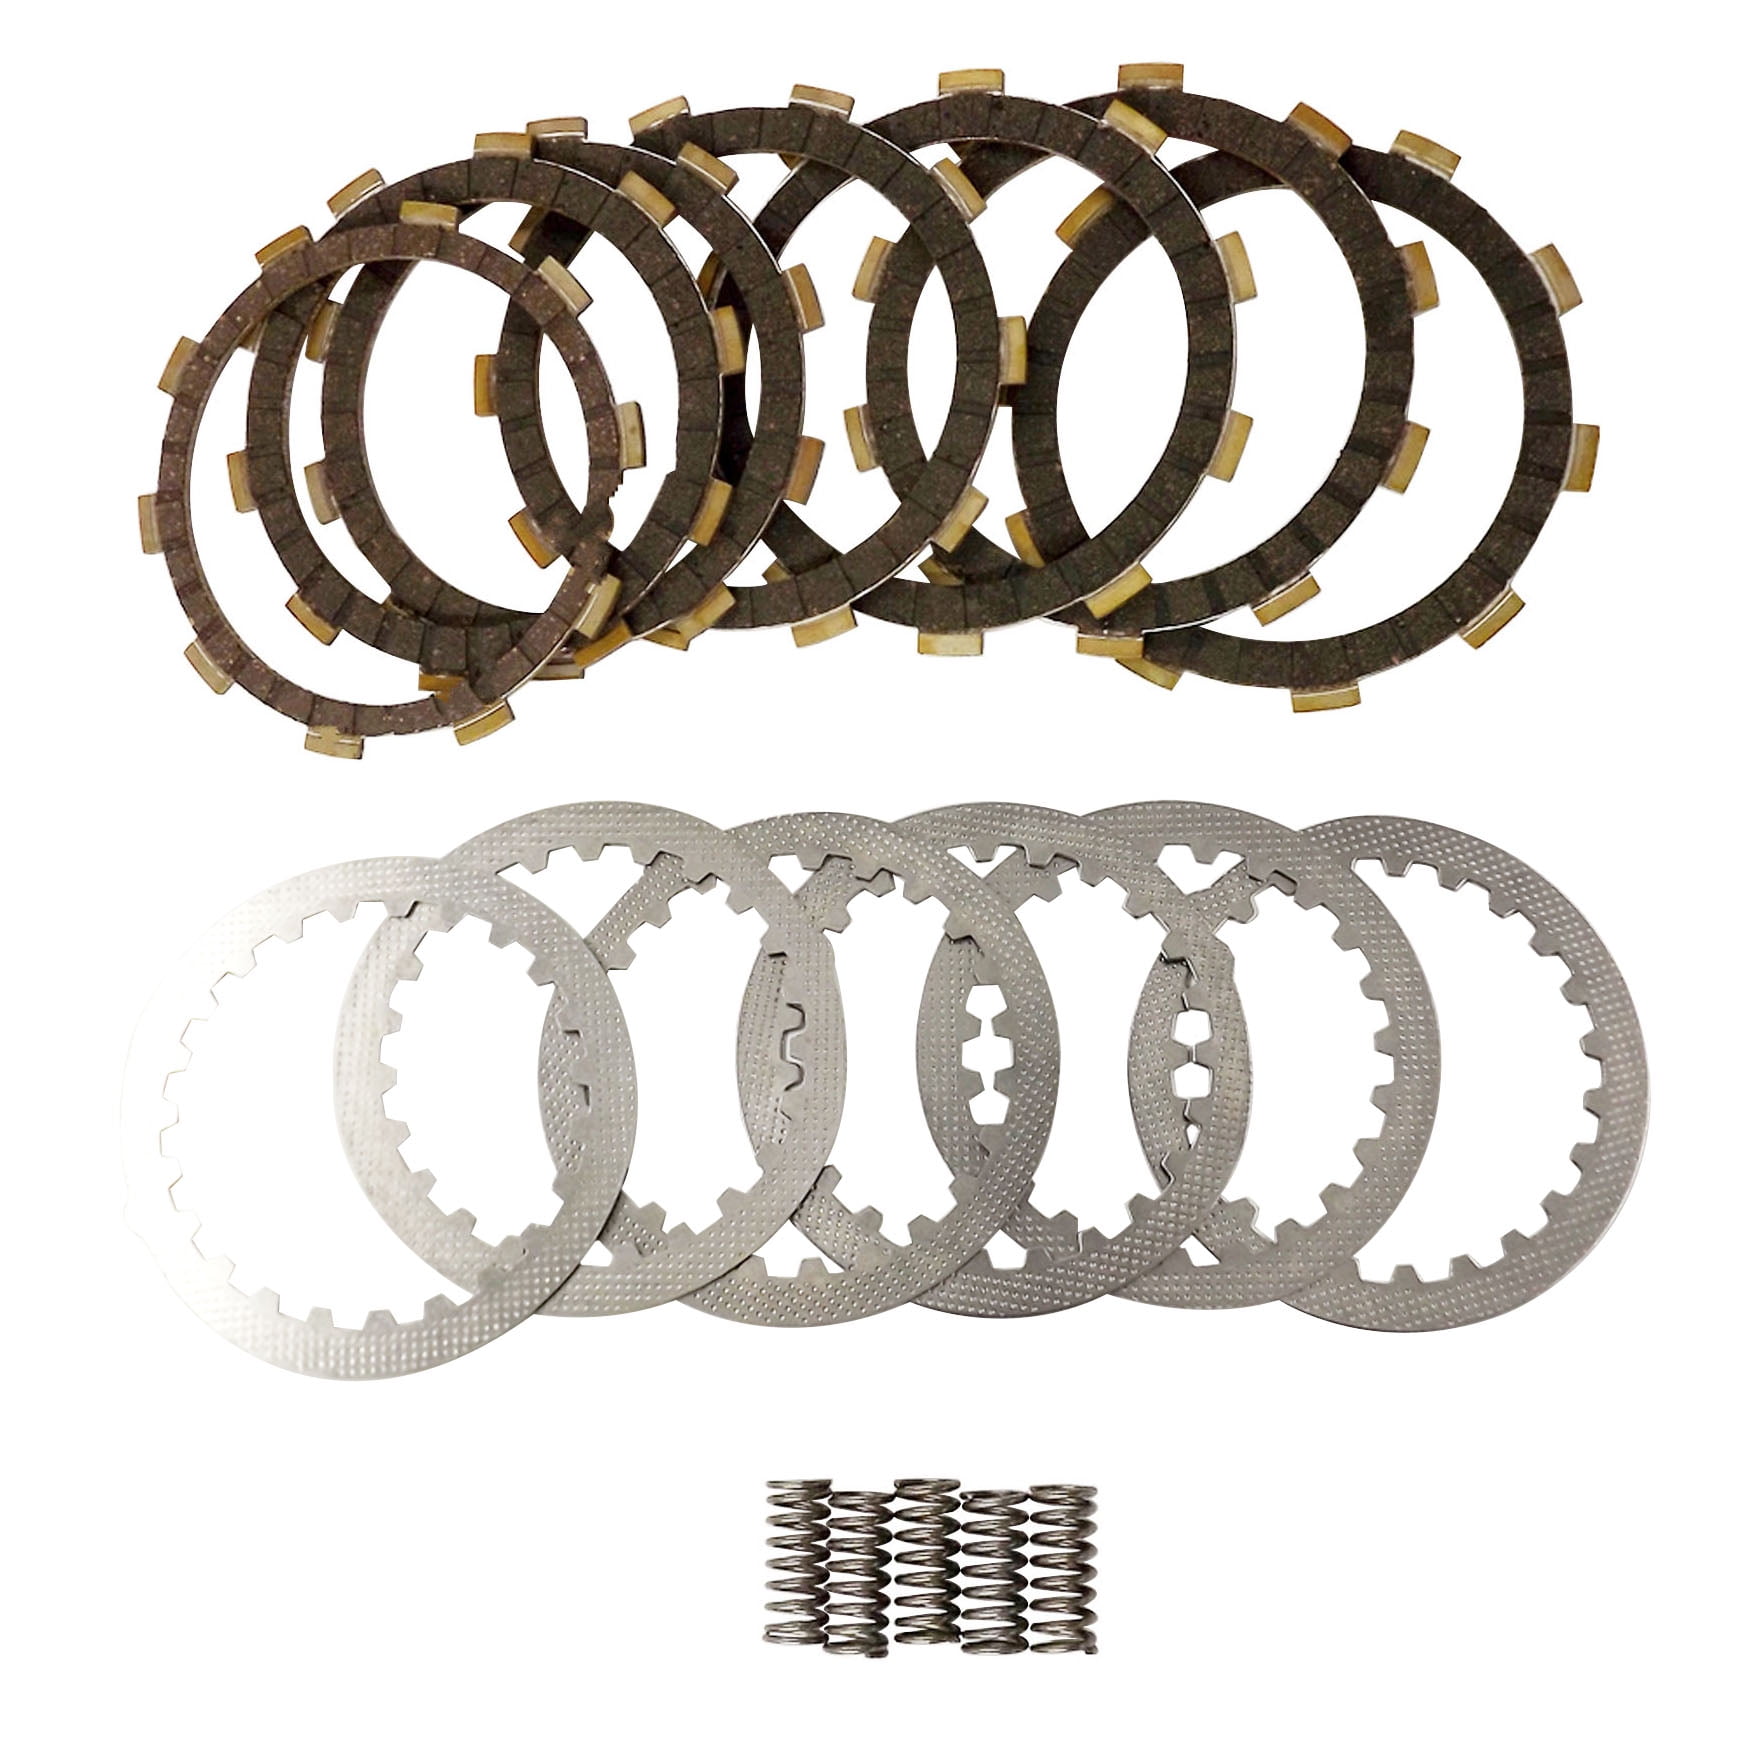 Springs Yamaha Blaster 1988-2006 Tusk Clutch Cover Gasket & Cable Kit YFS 200